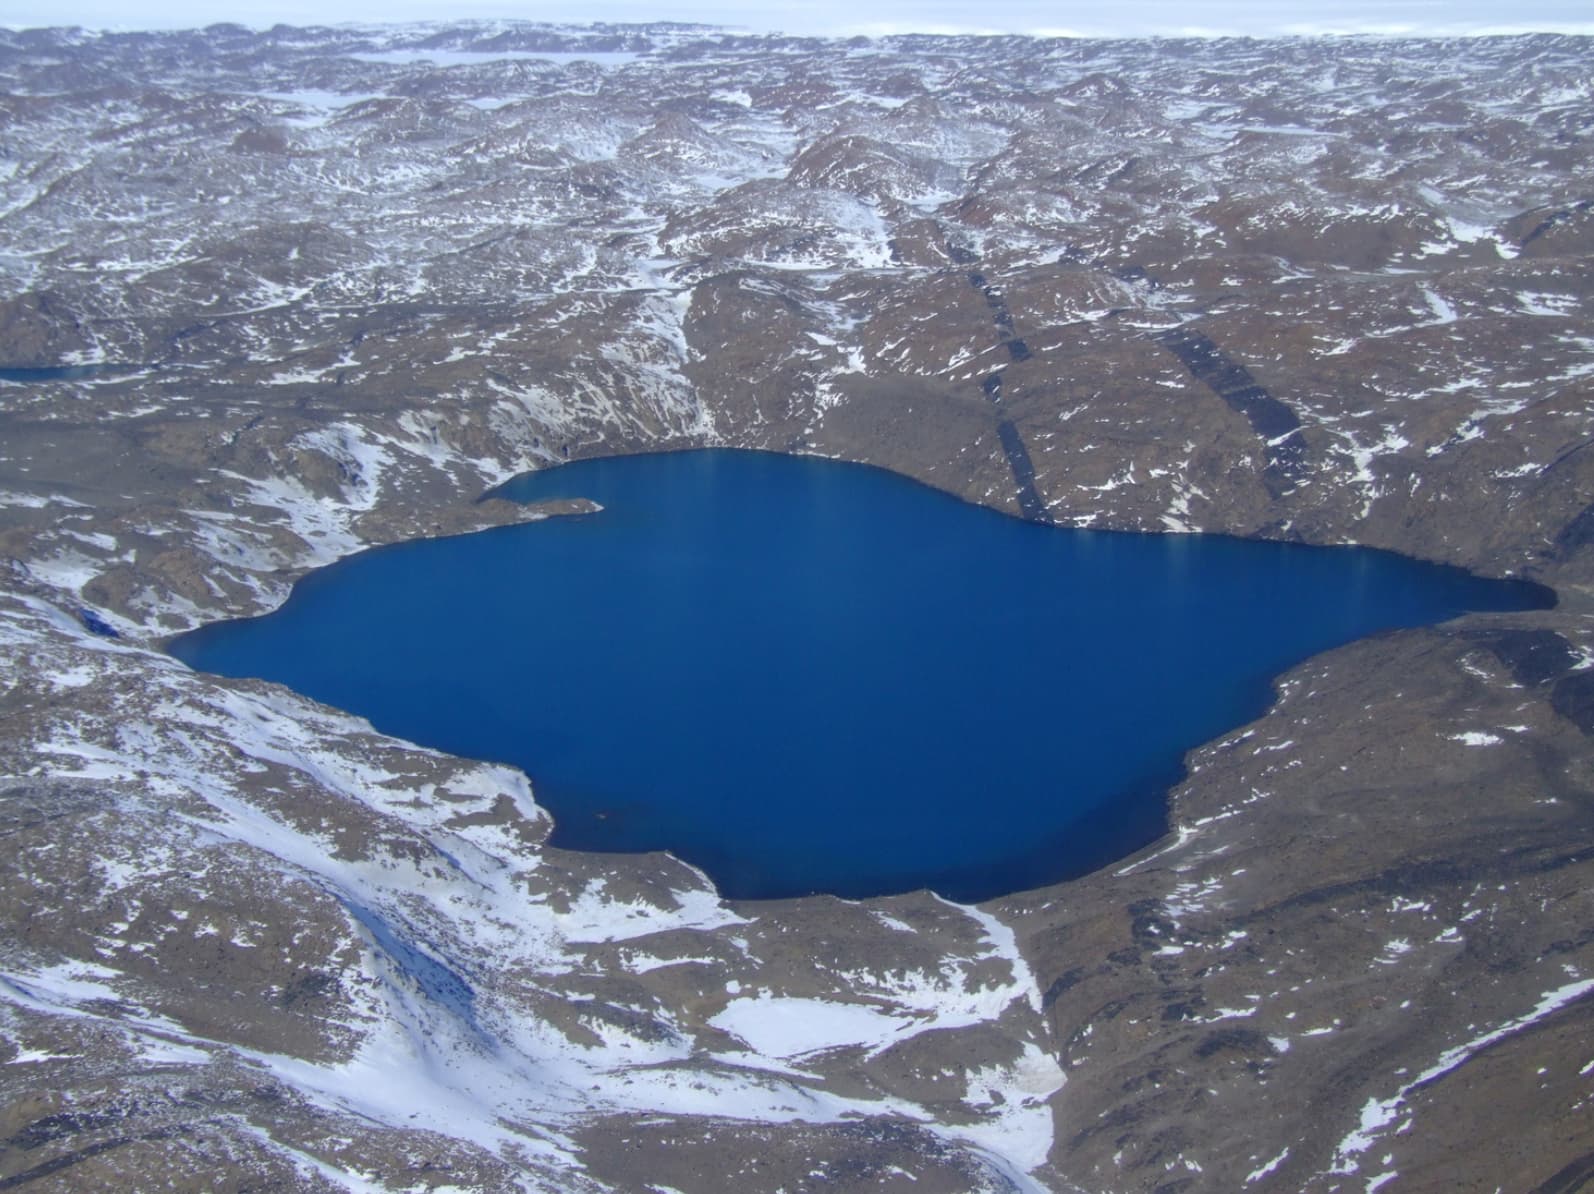 “TIL about Deep Lake, a lake in Antarctica that has such high salinity, 10 times saltier than the oceans, that it never freezes, even in the winter. Conditions in the lake are so hostile that almost nothing can survive there.”